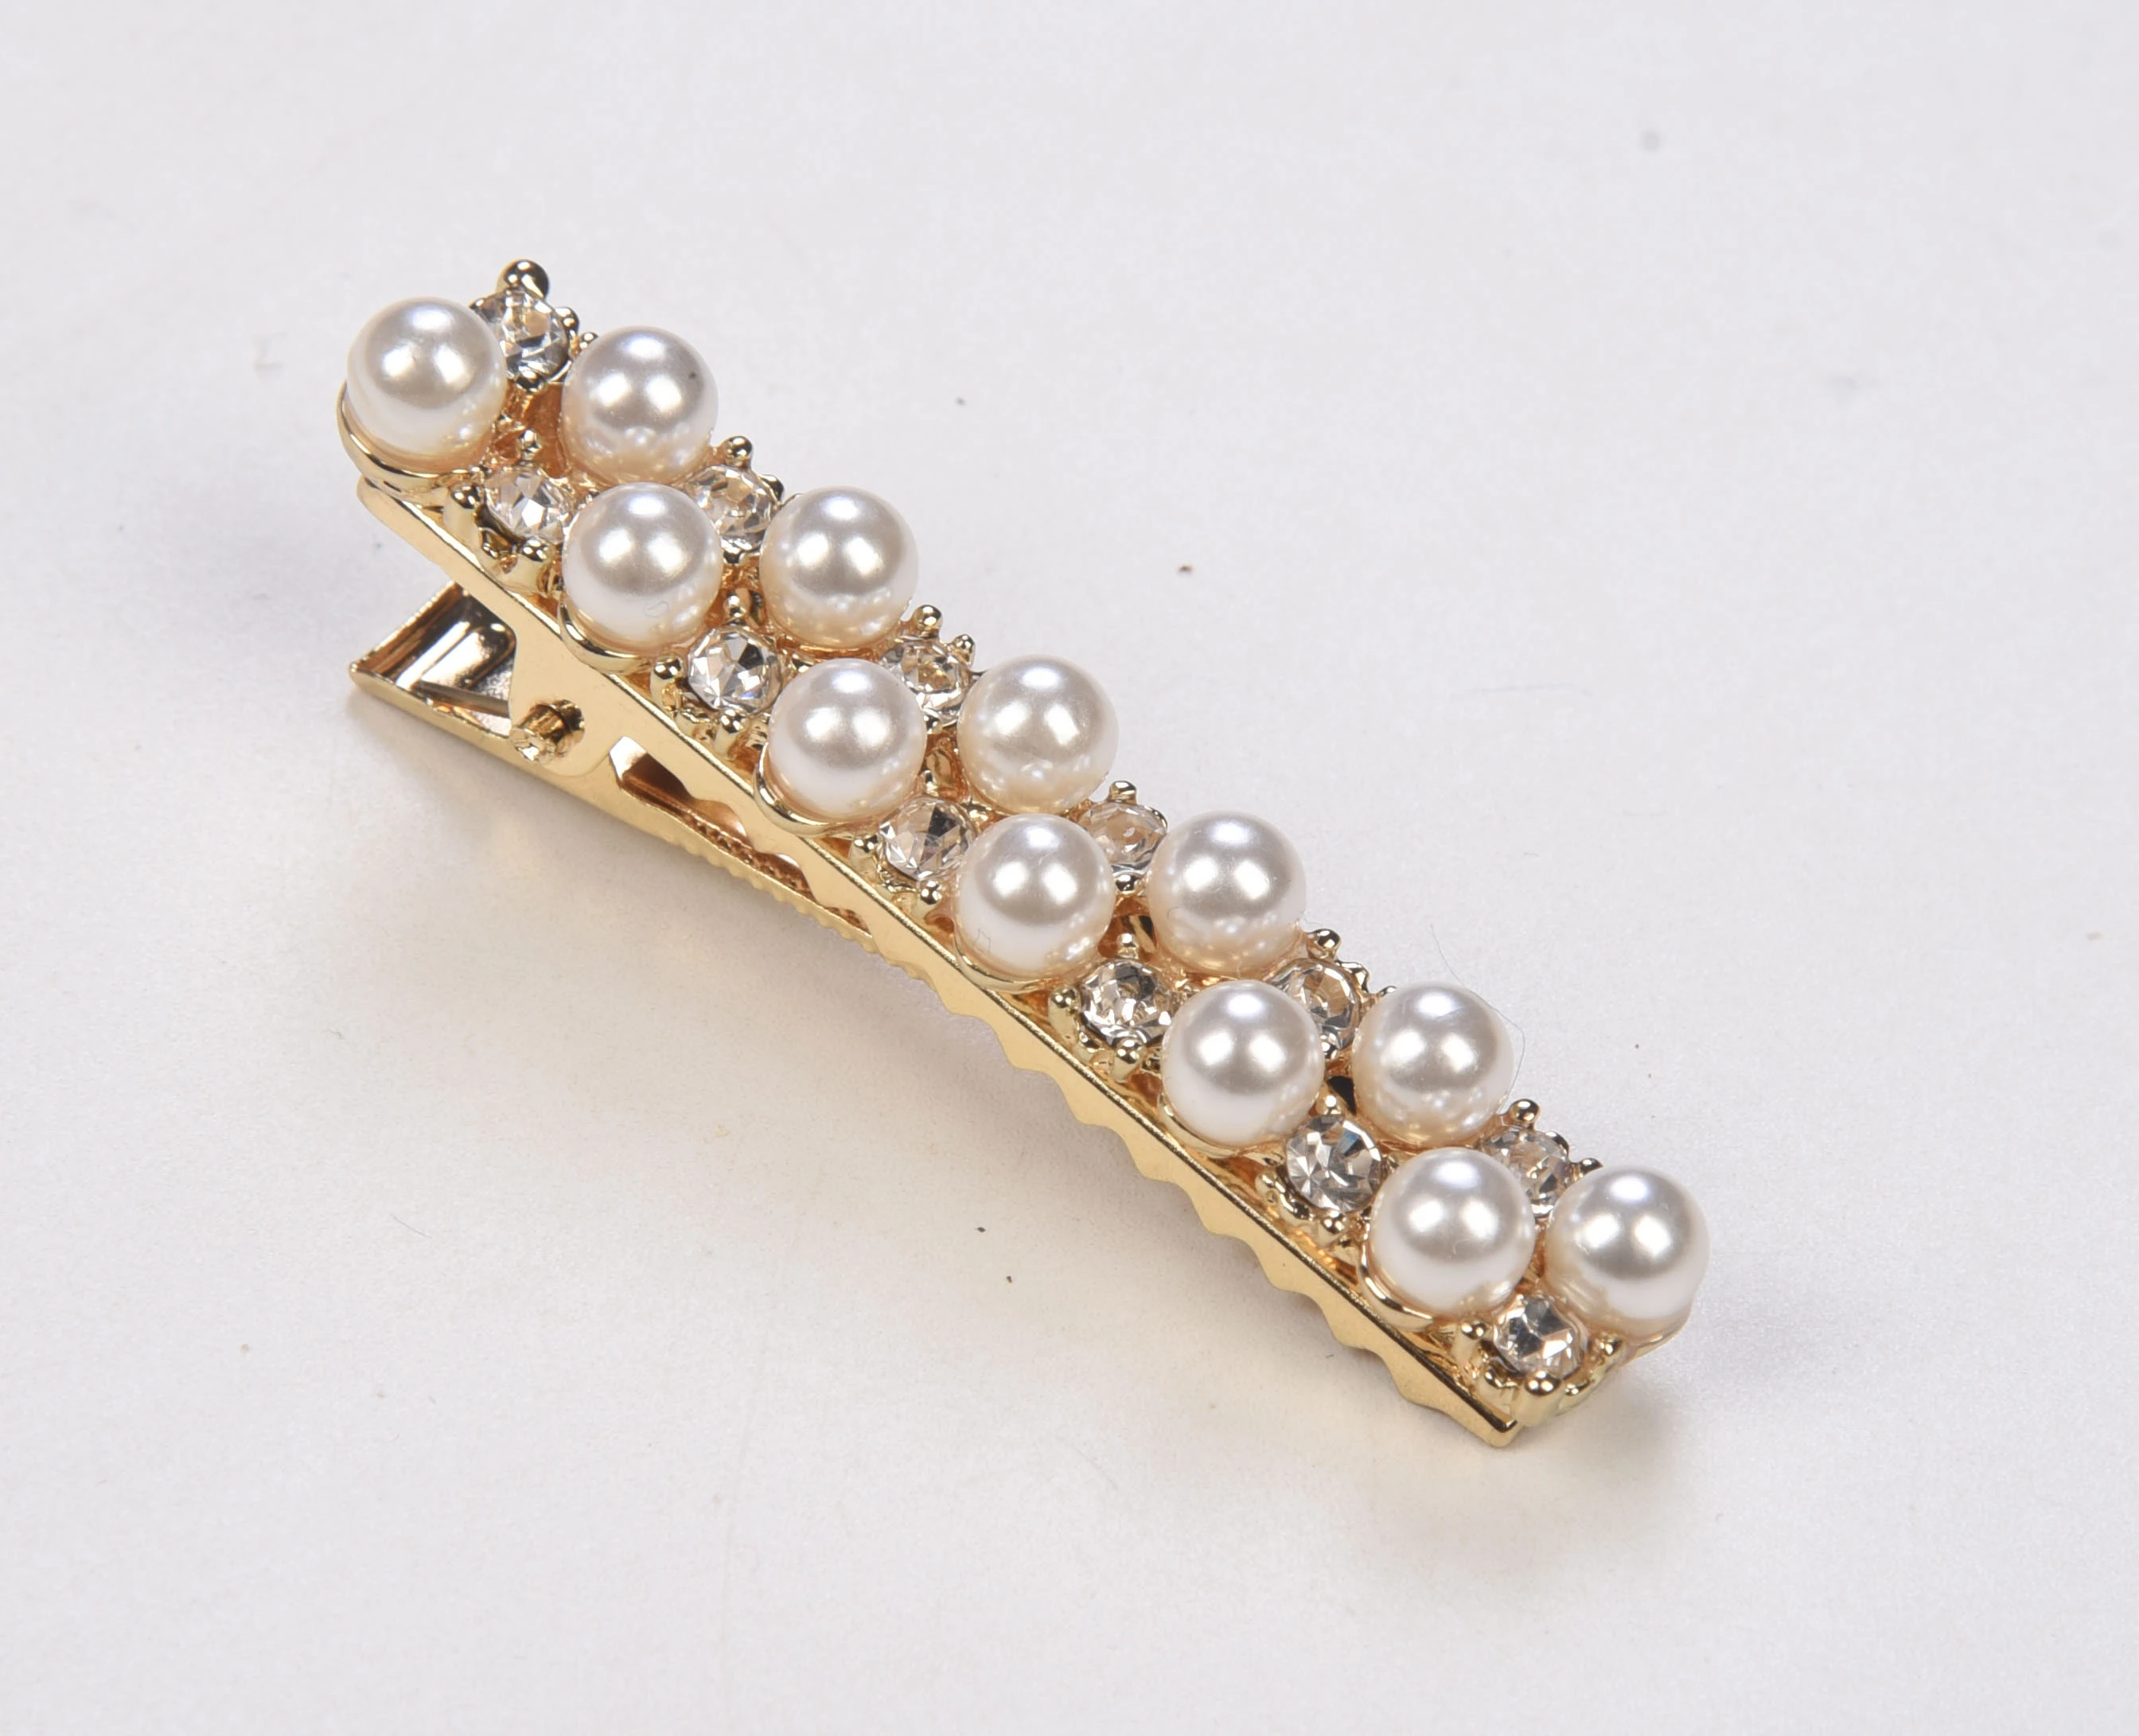 Gold plated hairgrips hair clip with crystals and pearls for girls